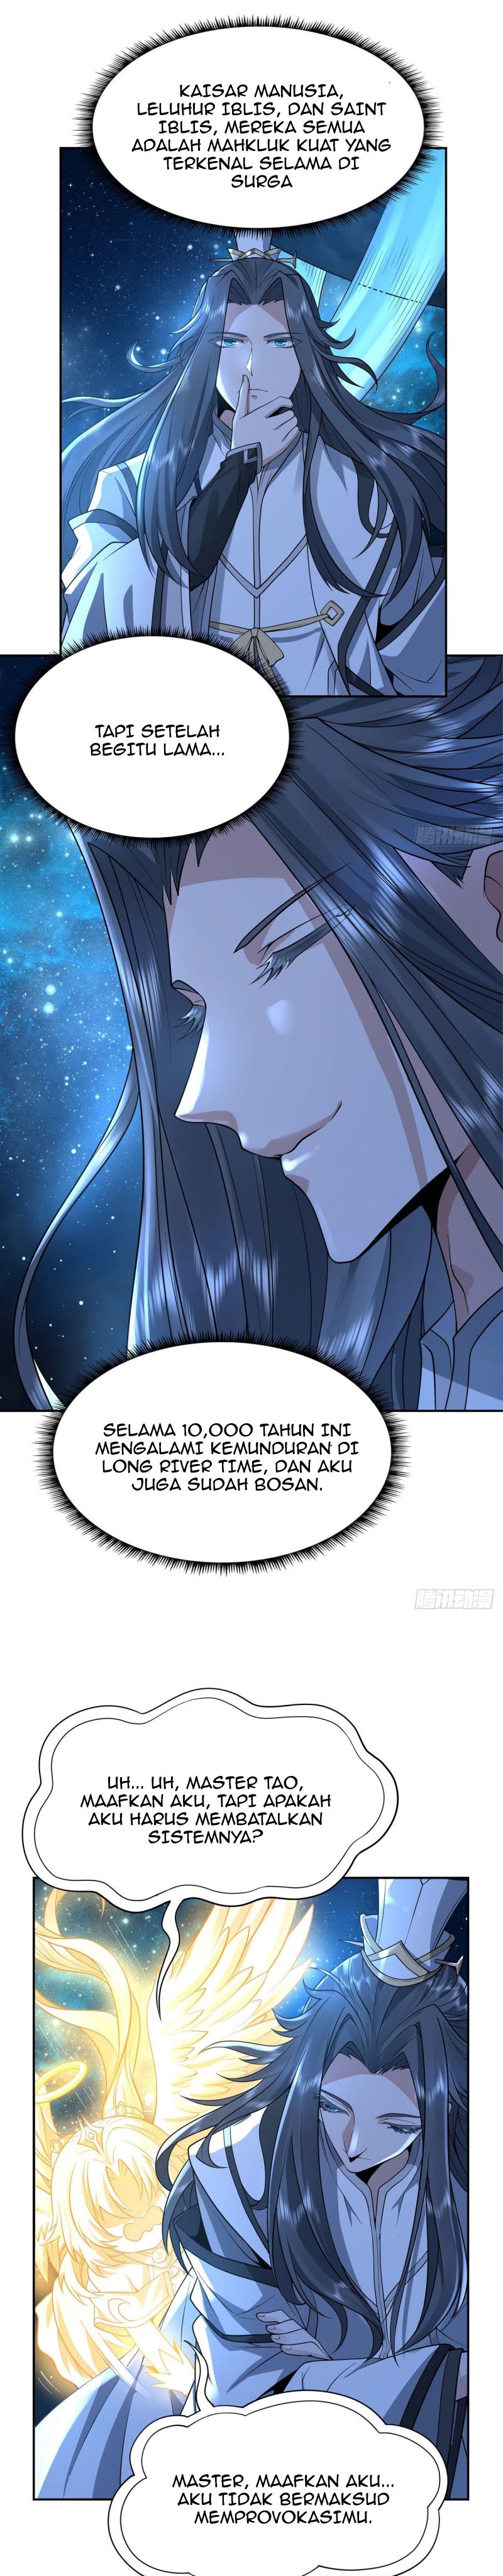 Dilarang COPAS - situs resmi www.mangacanblog.com - Komik my female apprentices are all big shots from the future 000 - chapter 0 1 Indonesia my female apprentices are all big shots from the future 000 - chapter 0 Terbaru 18|Baca Manga Komik Indonesia|Mangacan